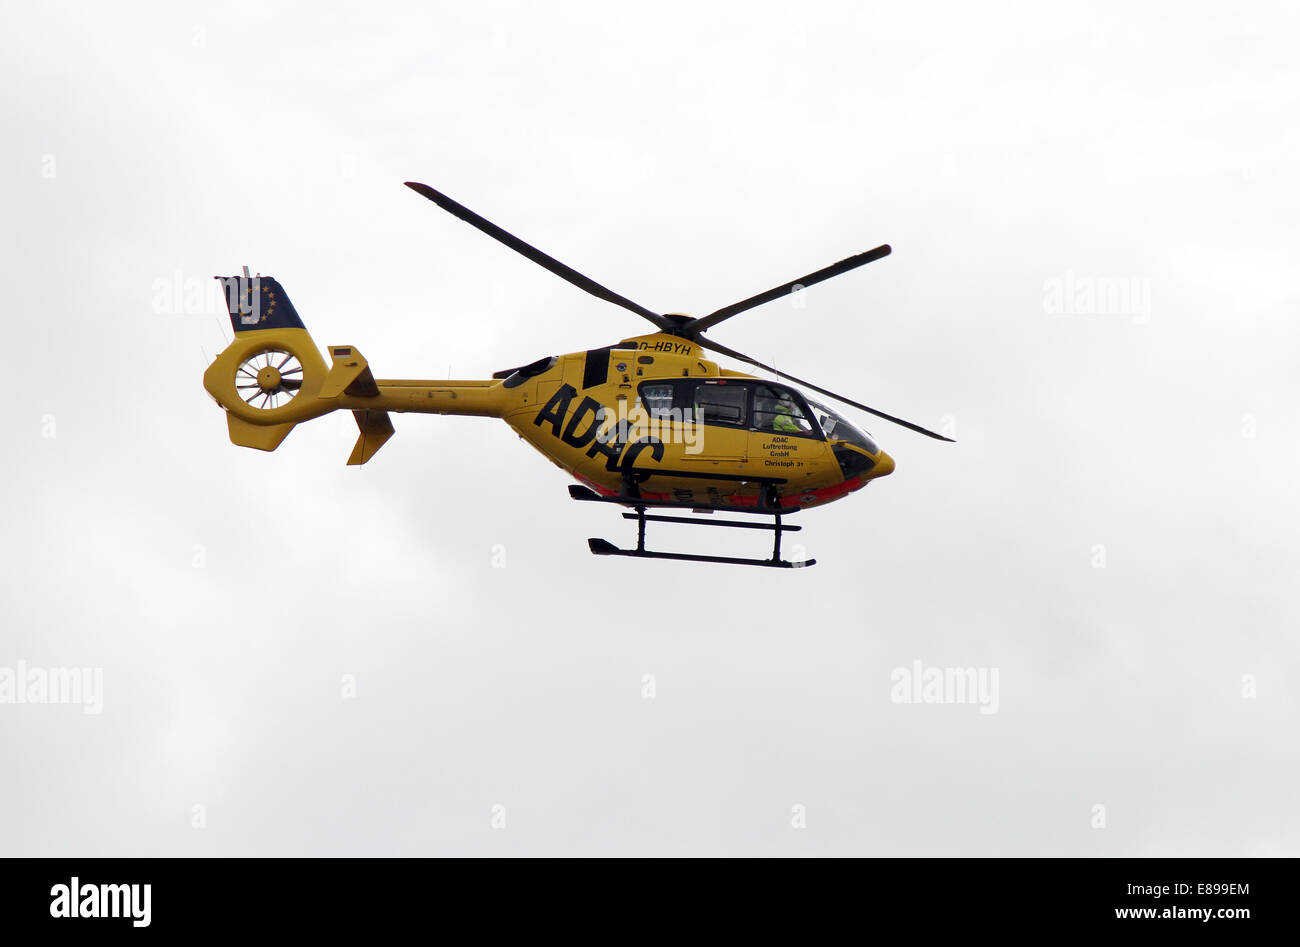 Berlin, Germany, ADAC rescue helicopter Christoph 31 in flight Stock Photo